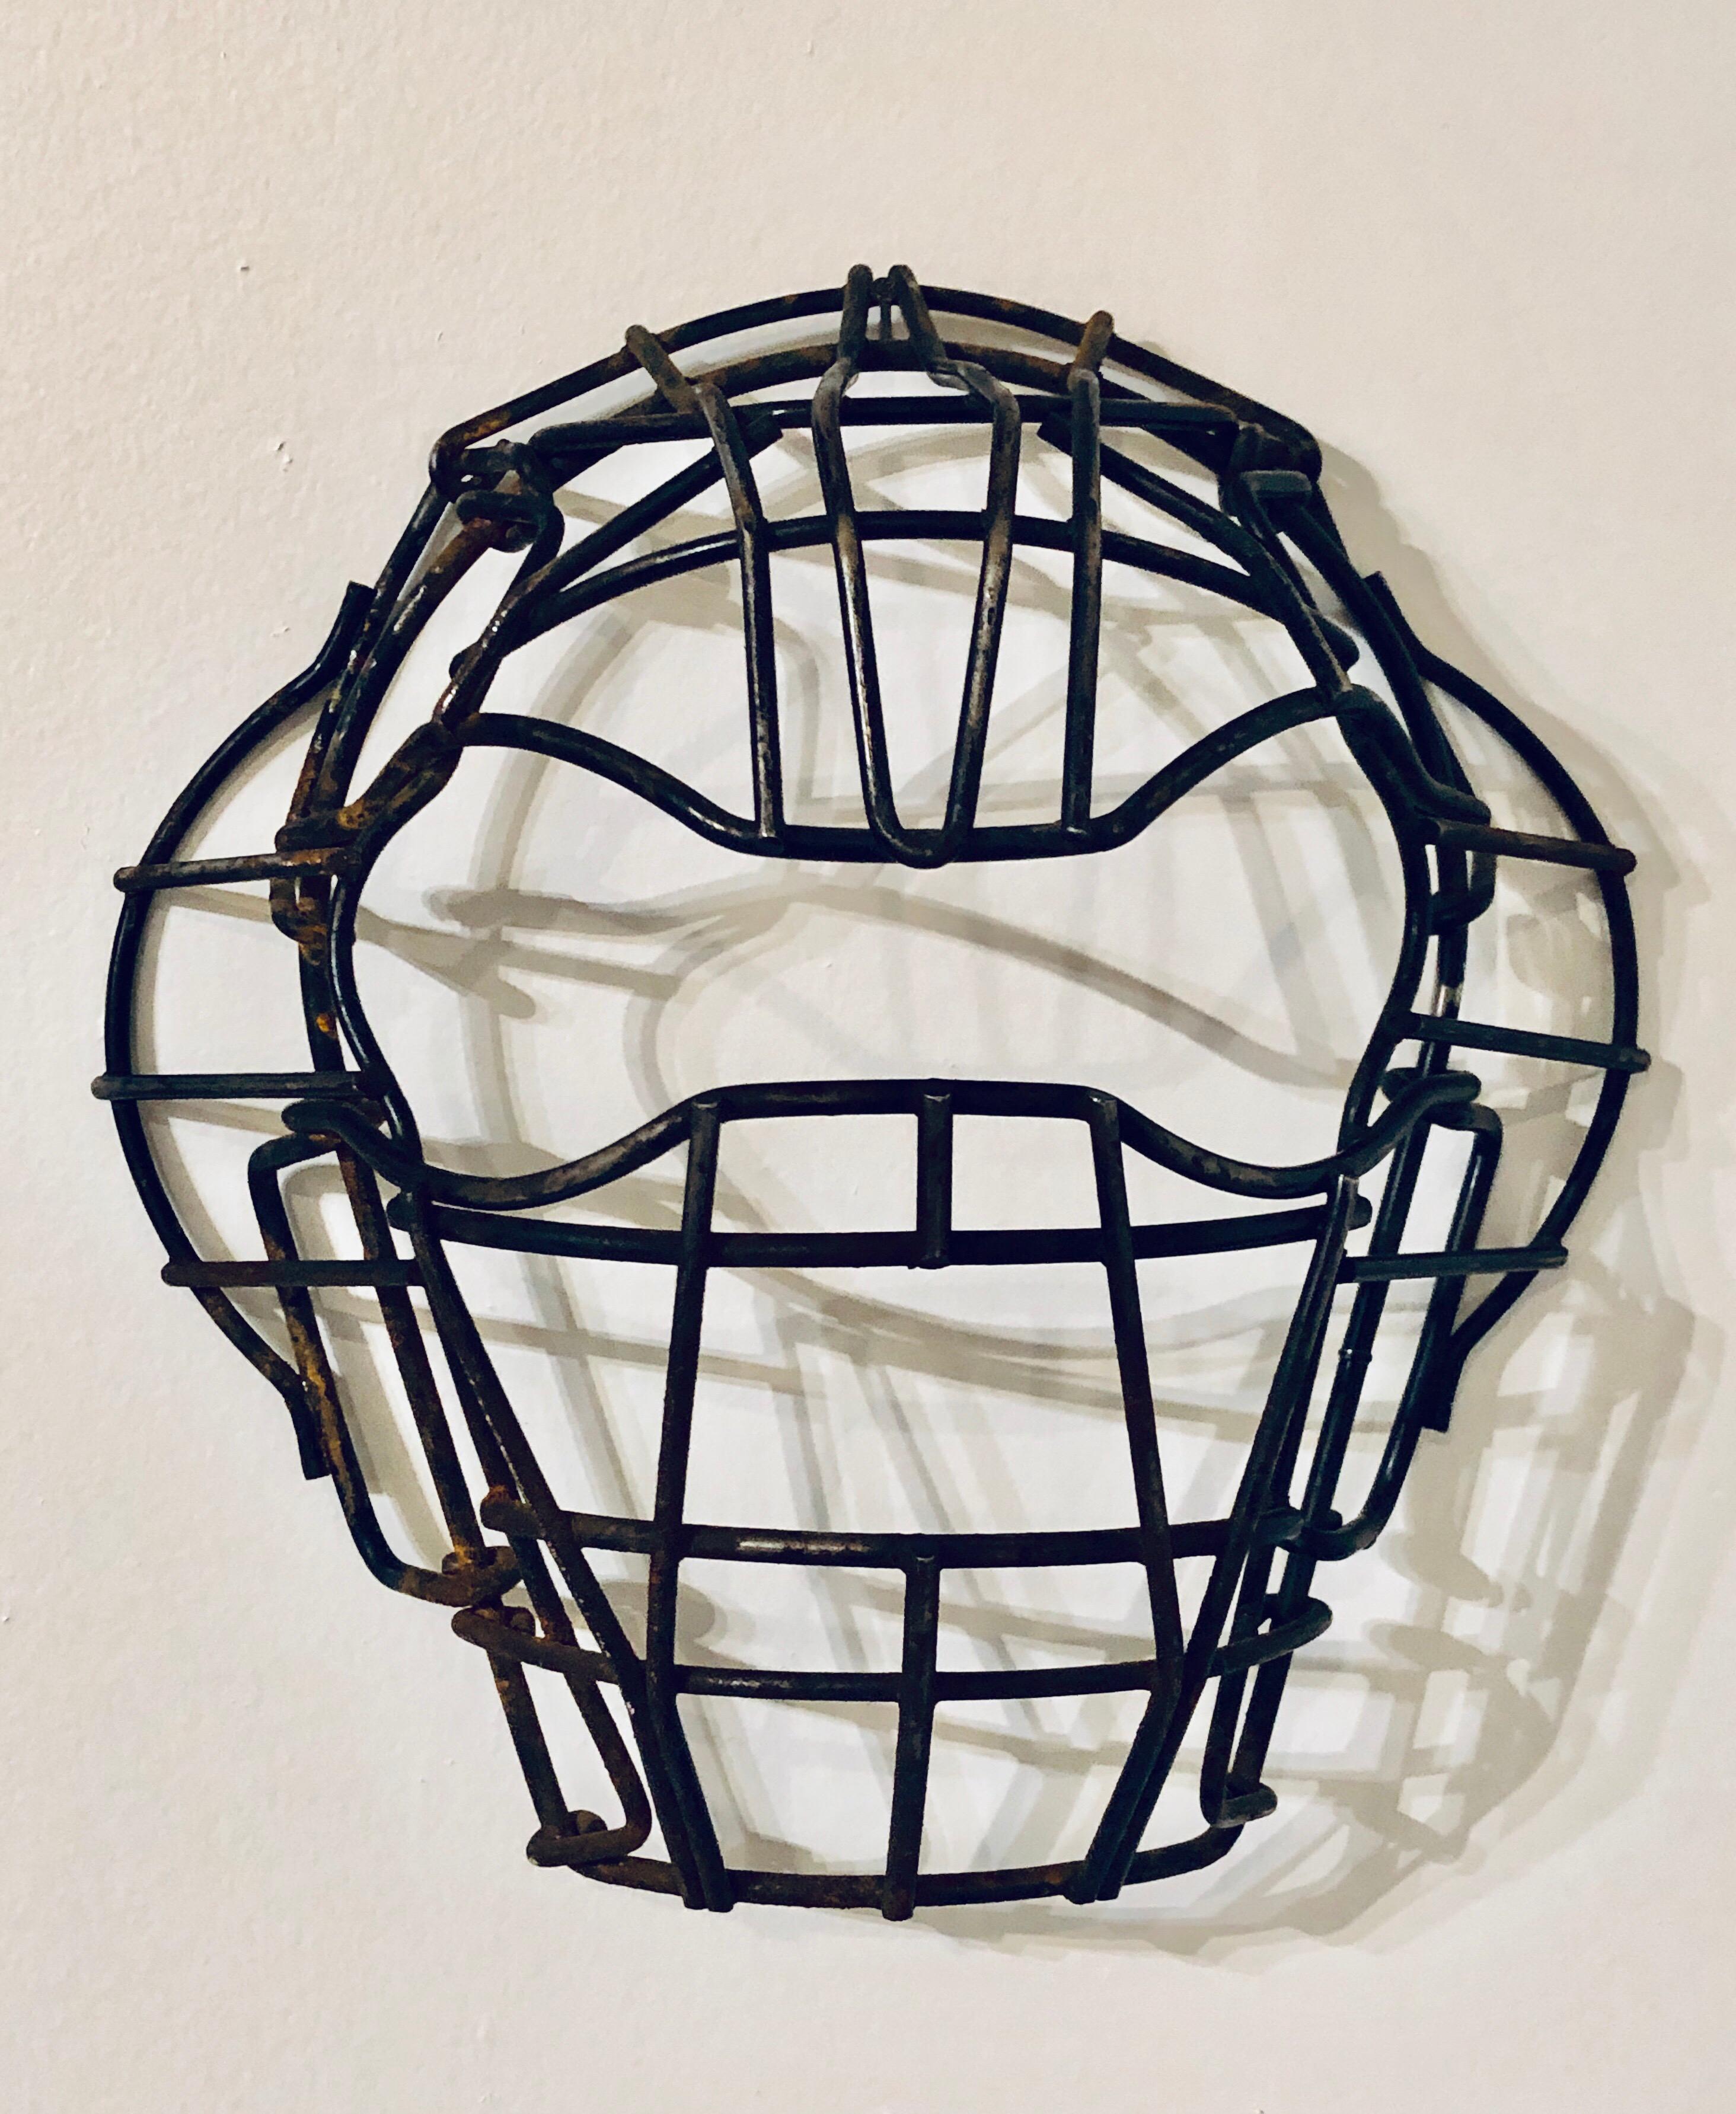 American Antique And Vintage Baseball Catchers Mask Collection